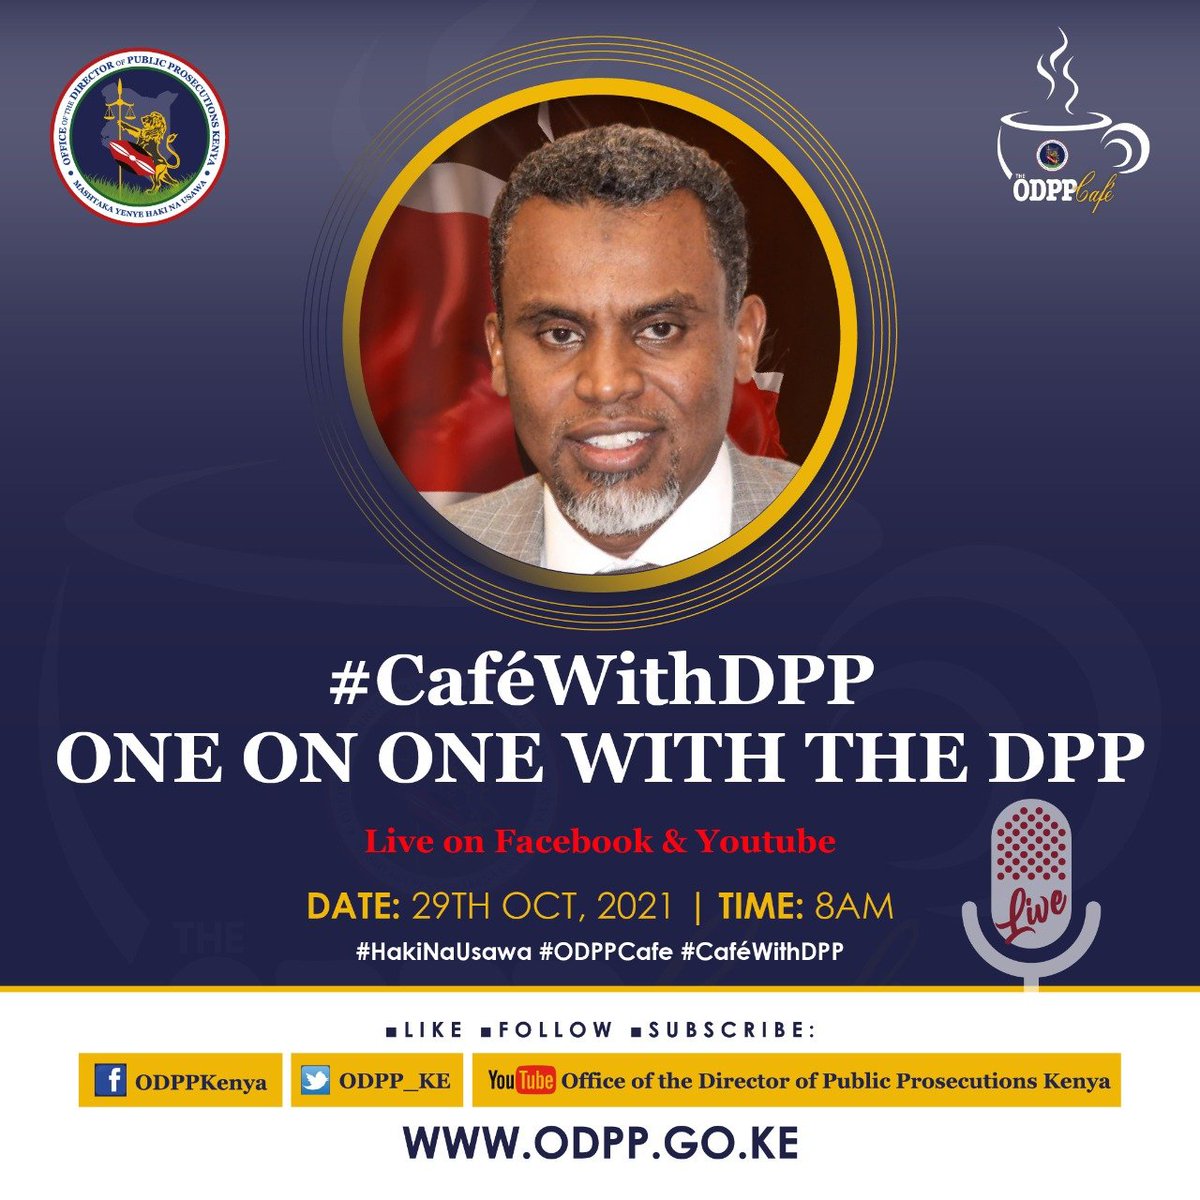 Transparency and accountability  is what we demand in prosecutions.  #HakiNaUsawa
#ODPPCafe
#CafeWithDPP